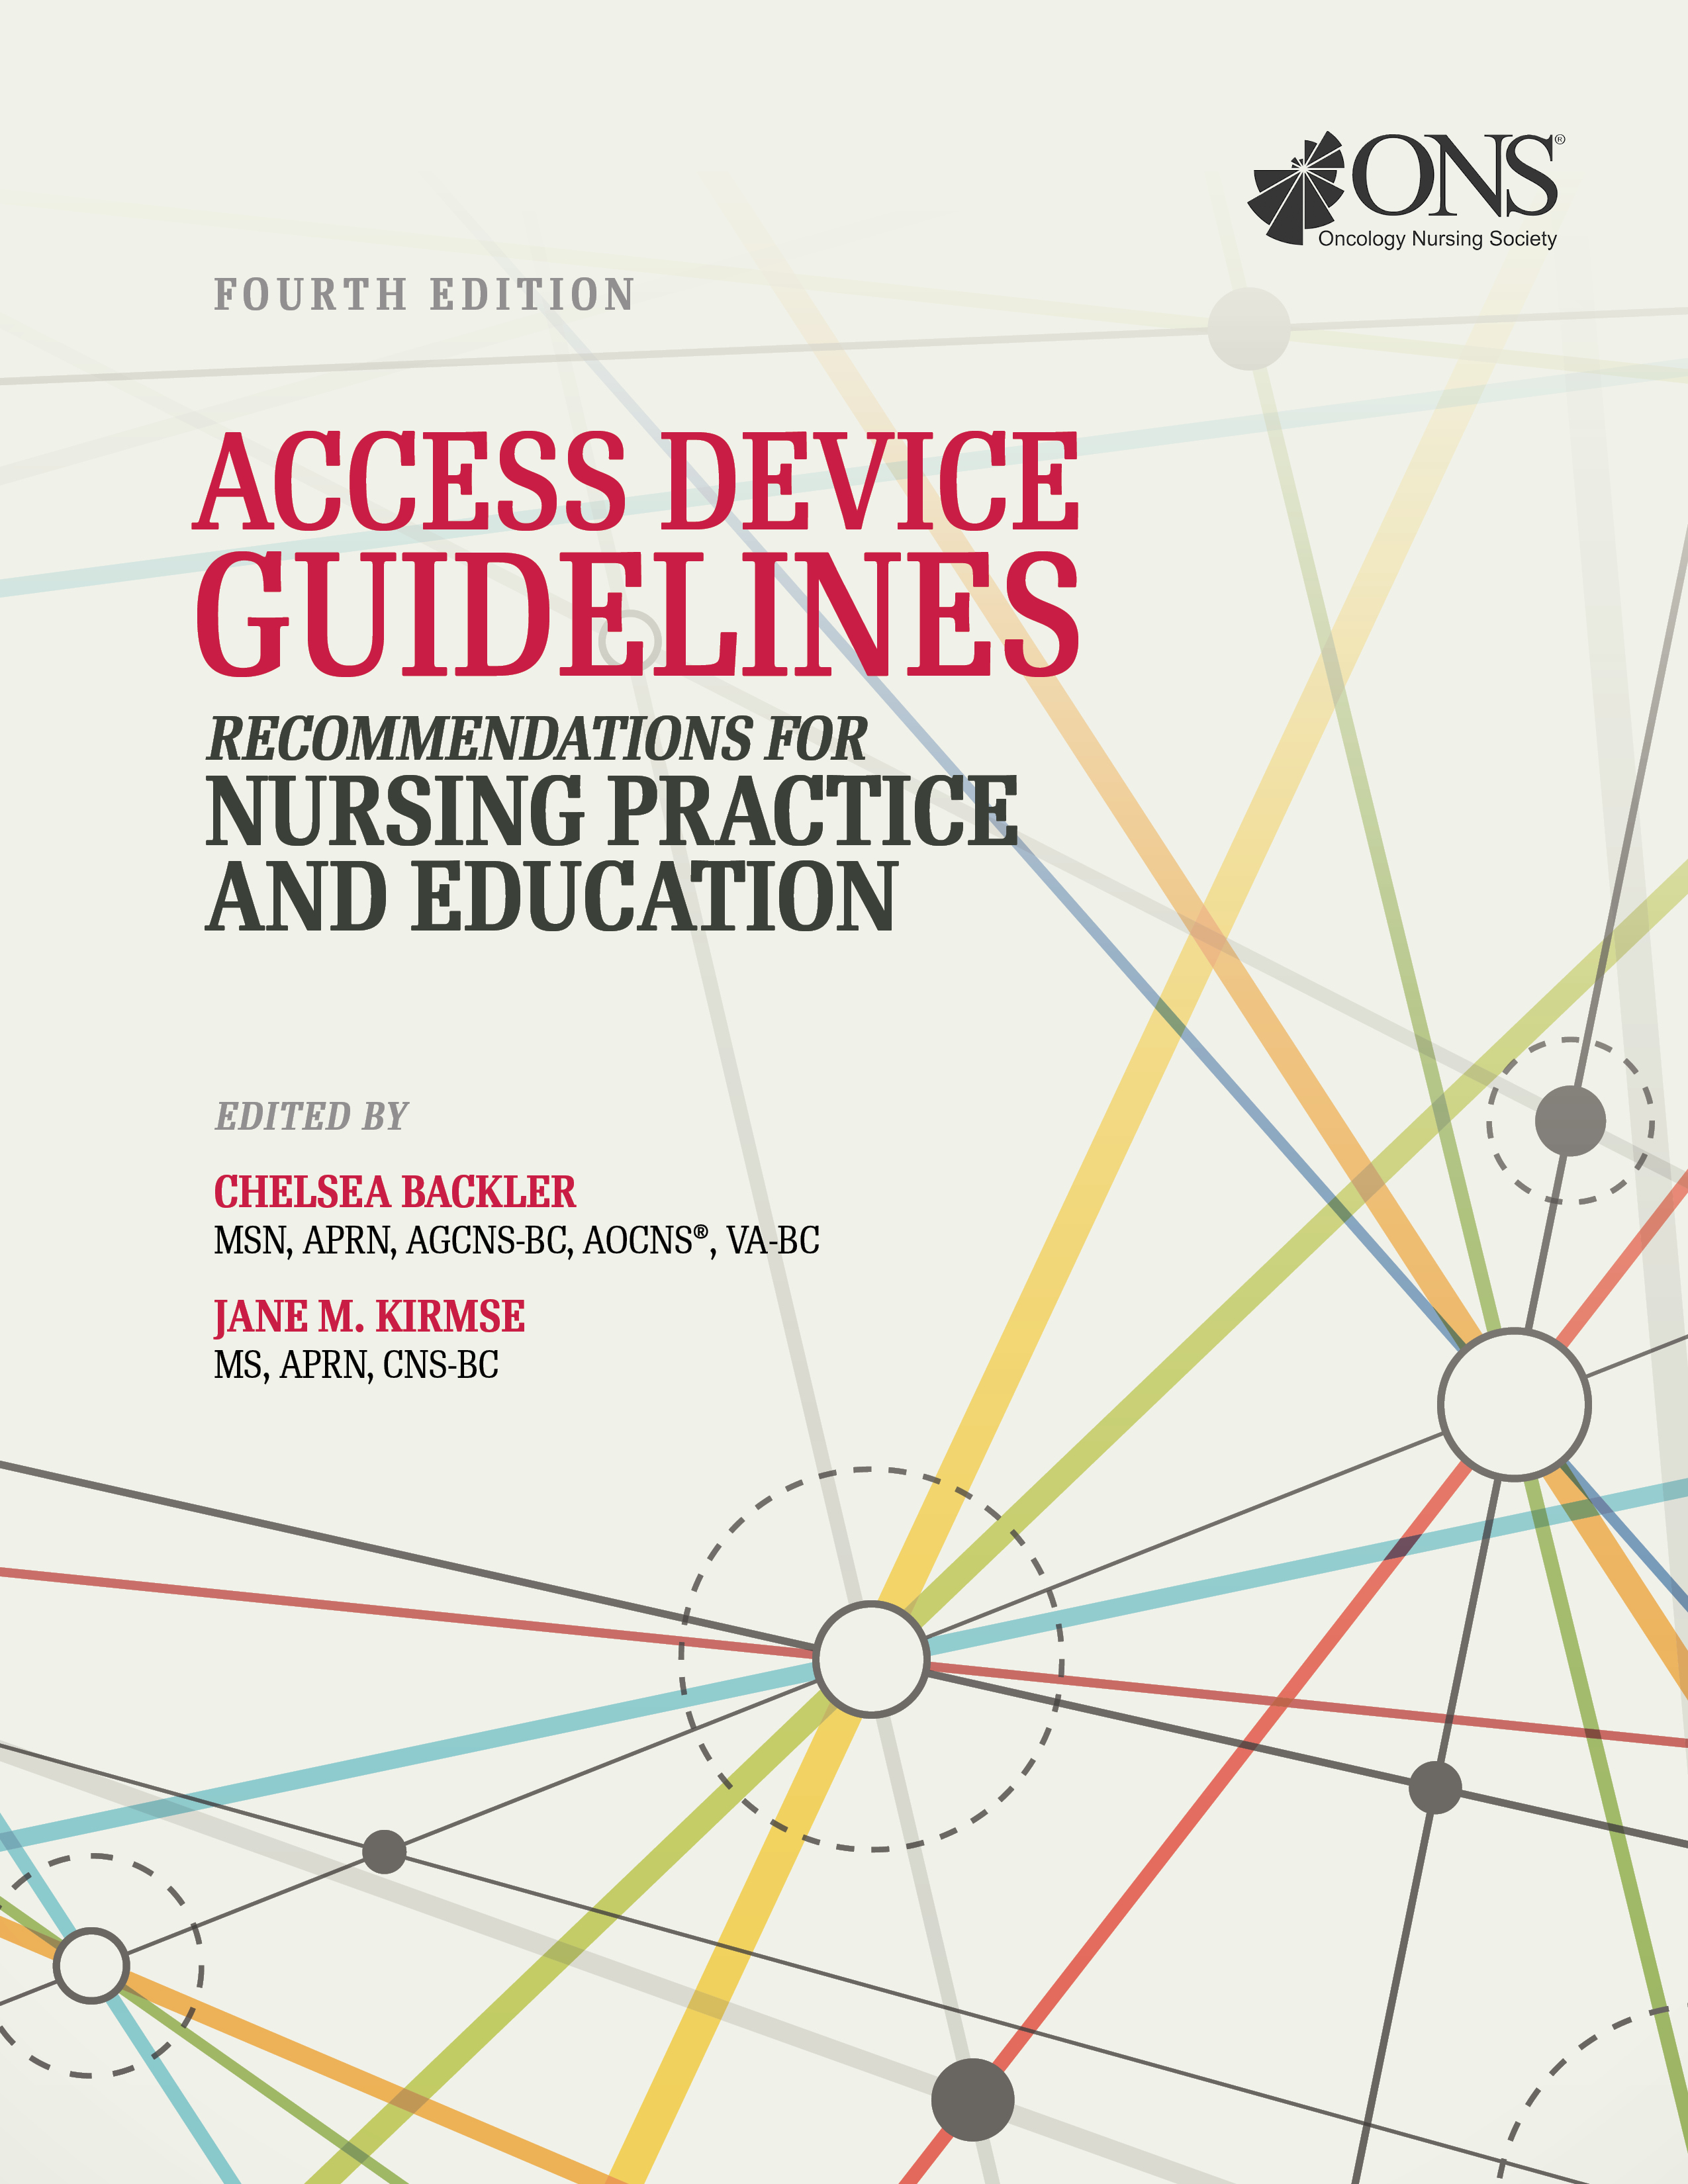 Access Device Guidelines: Recommendations for Nursing Practice and Education (Fourth Edition)